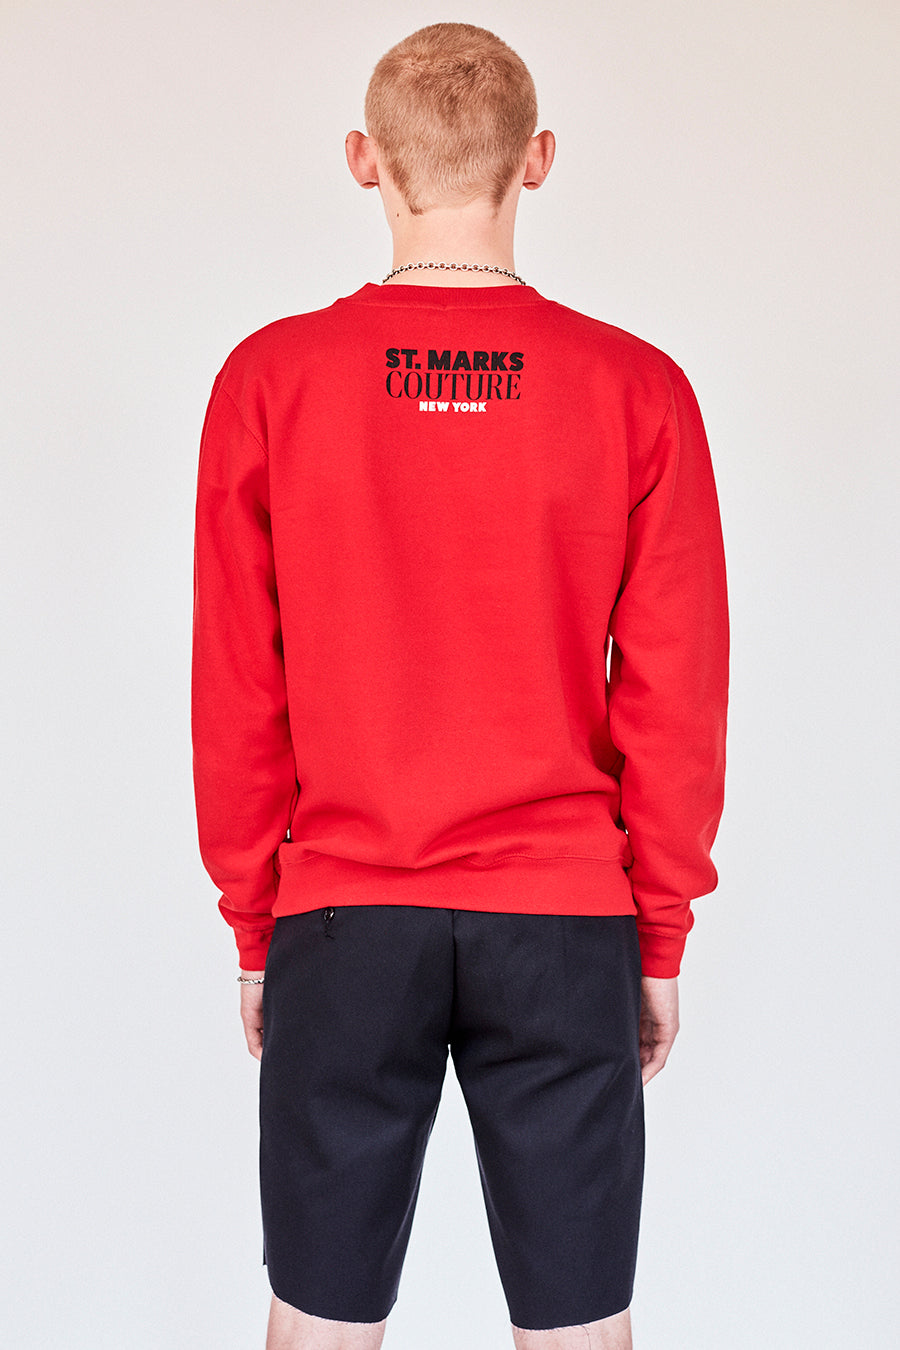 Brand New from New York City: Stmarksnewyork.com  Shop the St. Marks Street Sign red sweatshirt: Featuring St. Marks Street sign image on the front and St. Marks Couture New York logo on the back.  Hand silkscreen printed in New York with love.